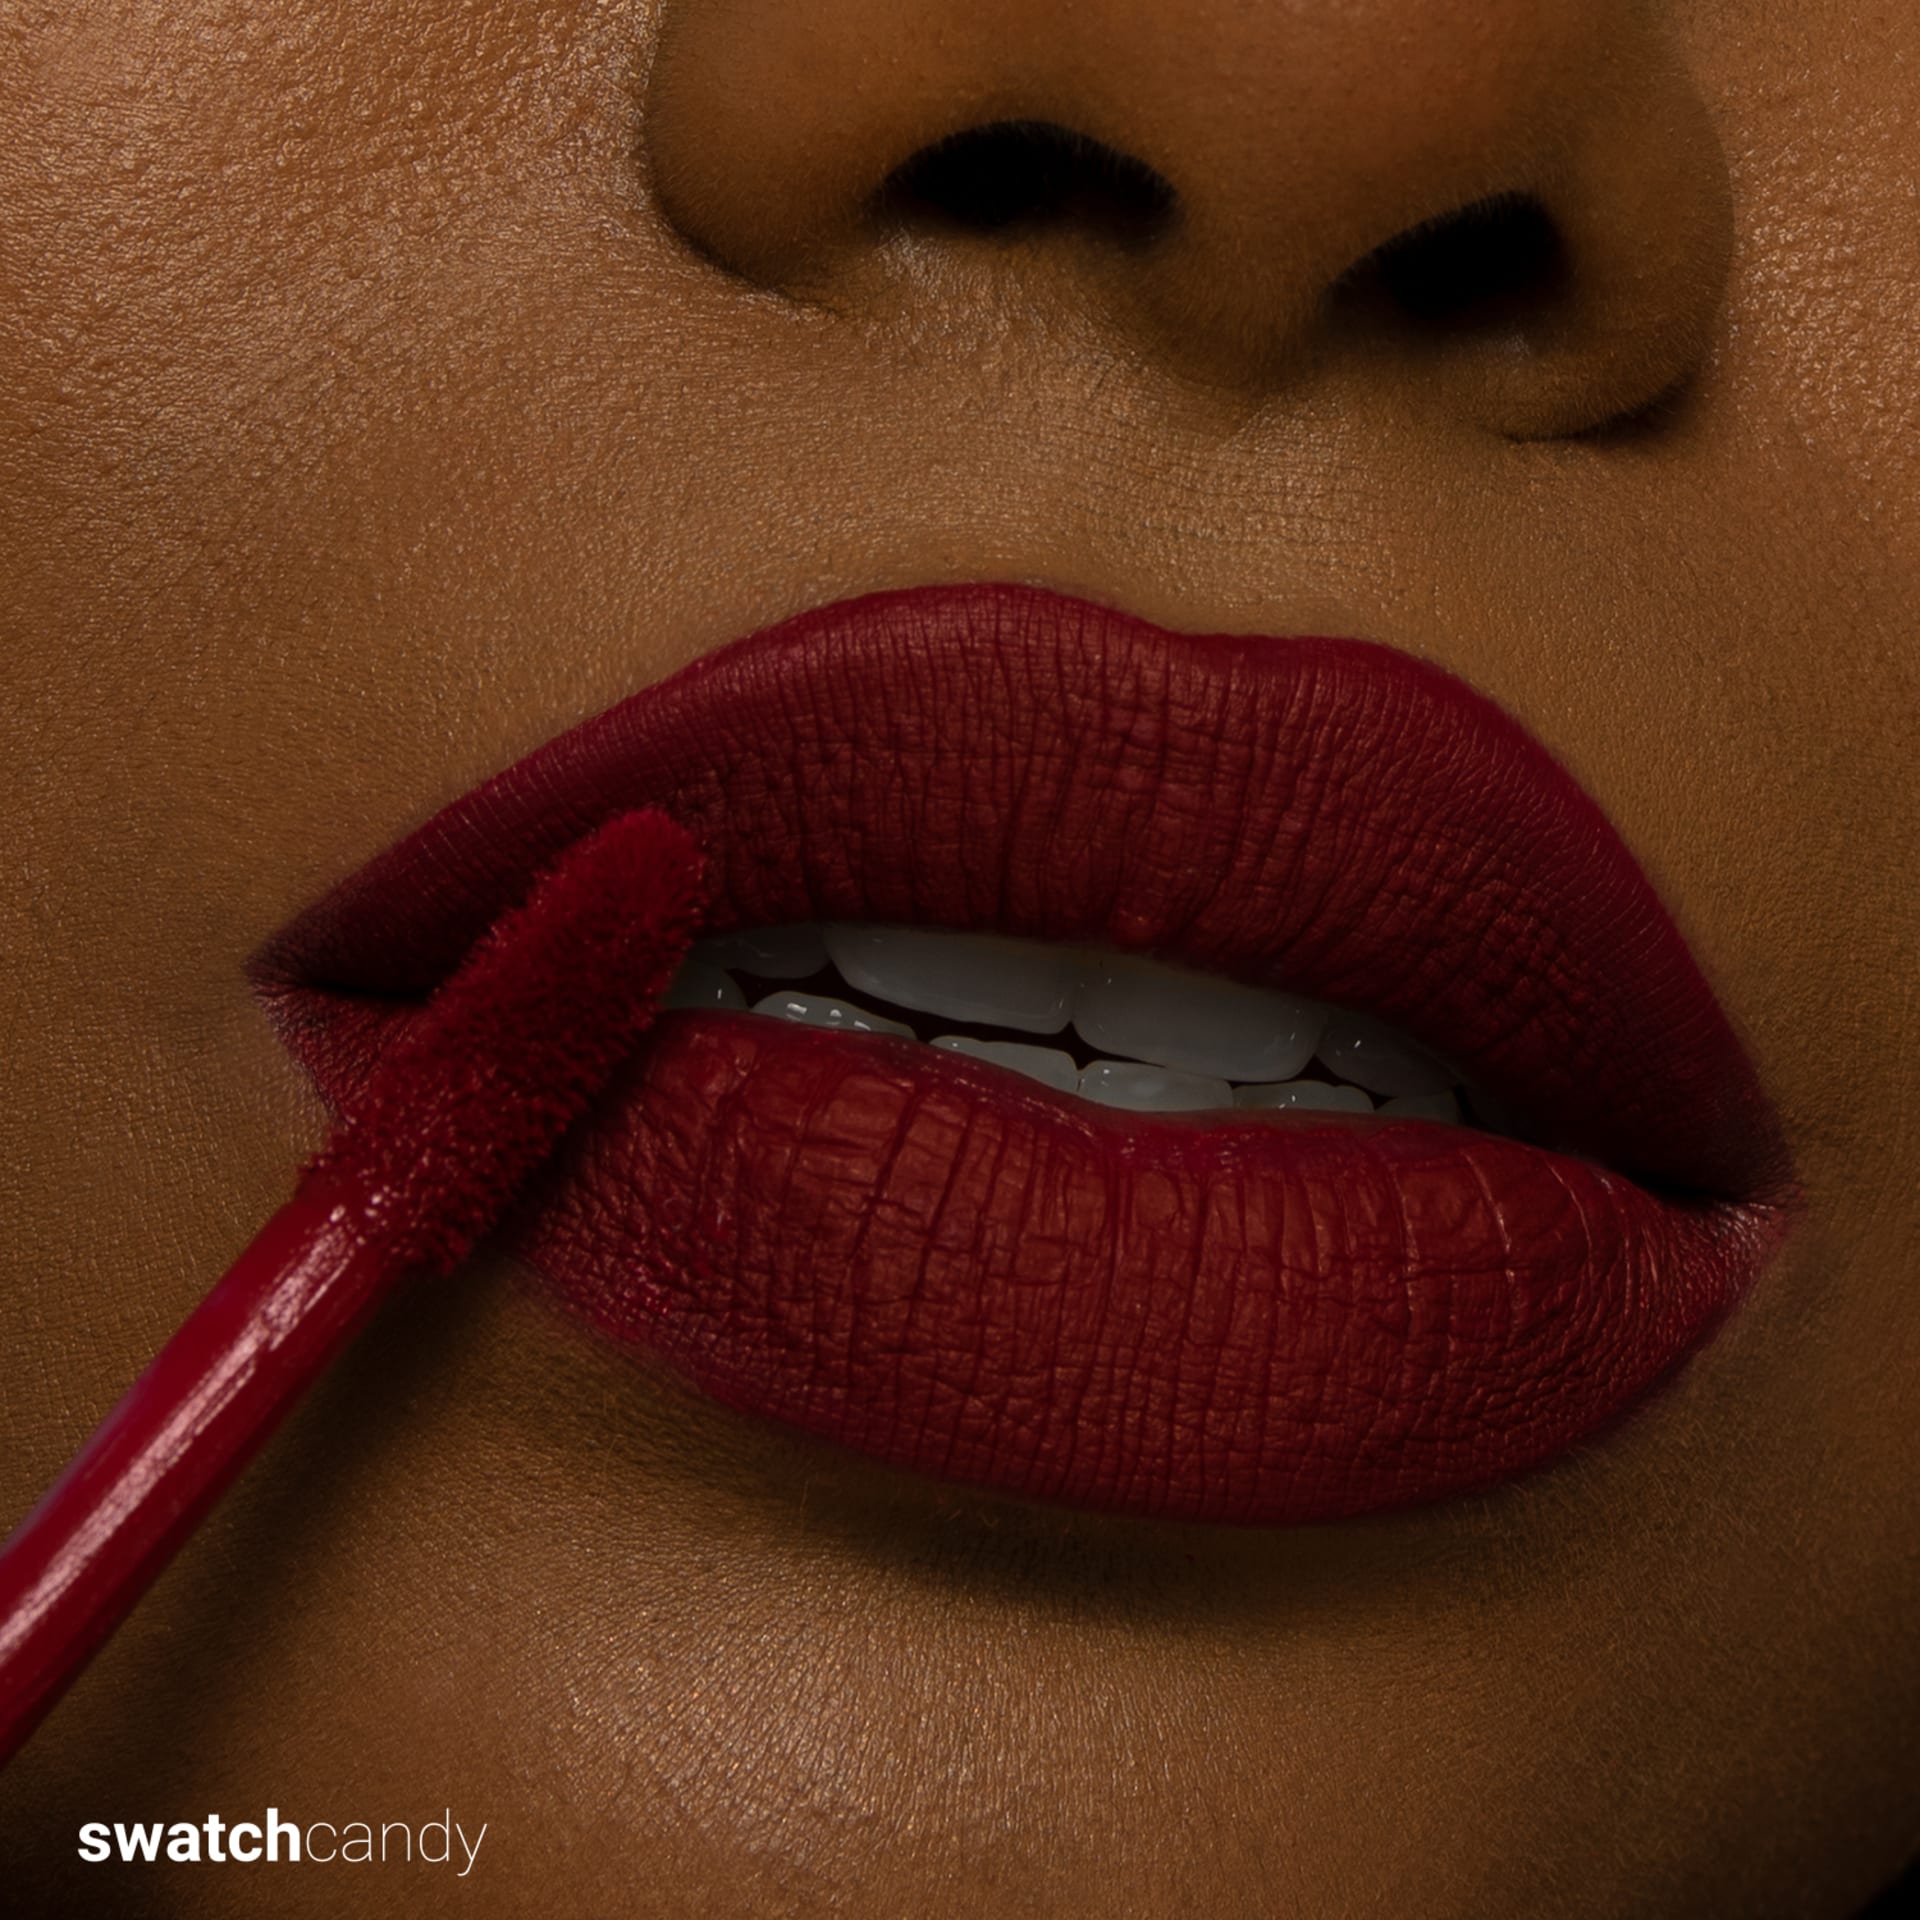 Swatchcandy Swatch Images Red Lip